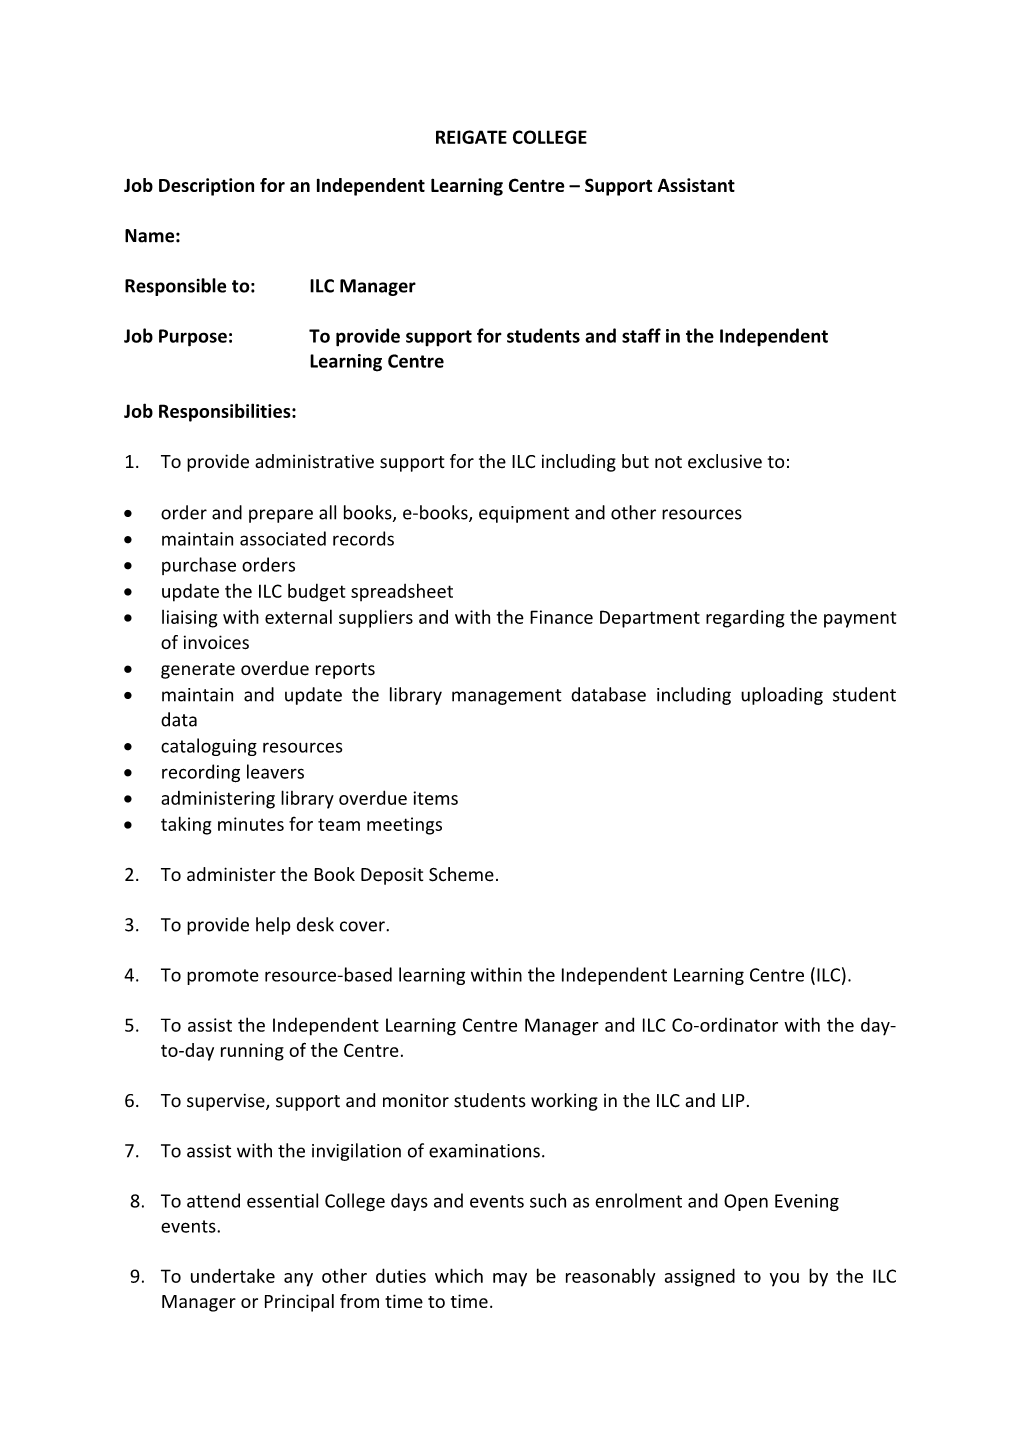 Job Description for an Independent Learning Centre Support Assistant